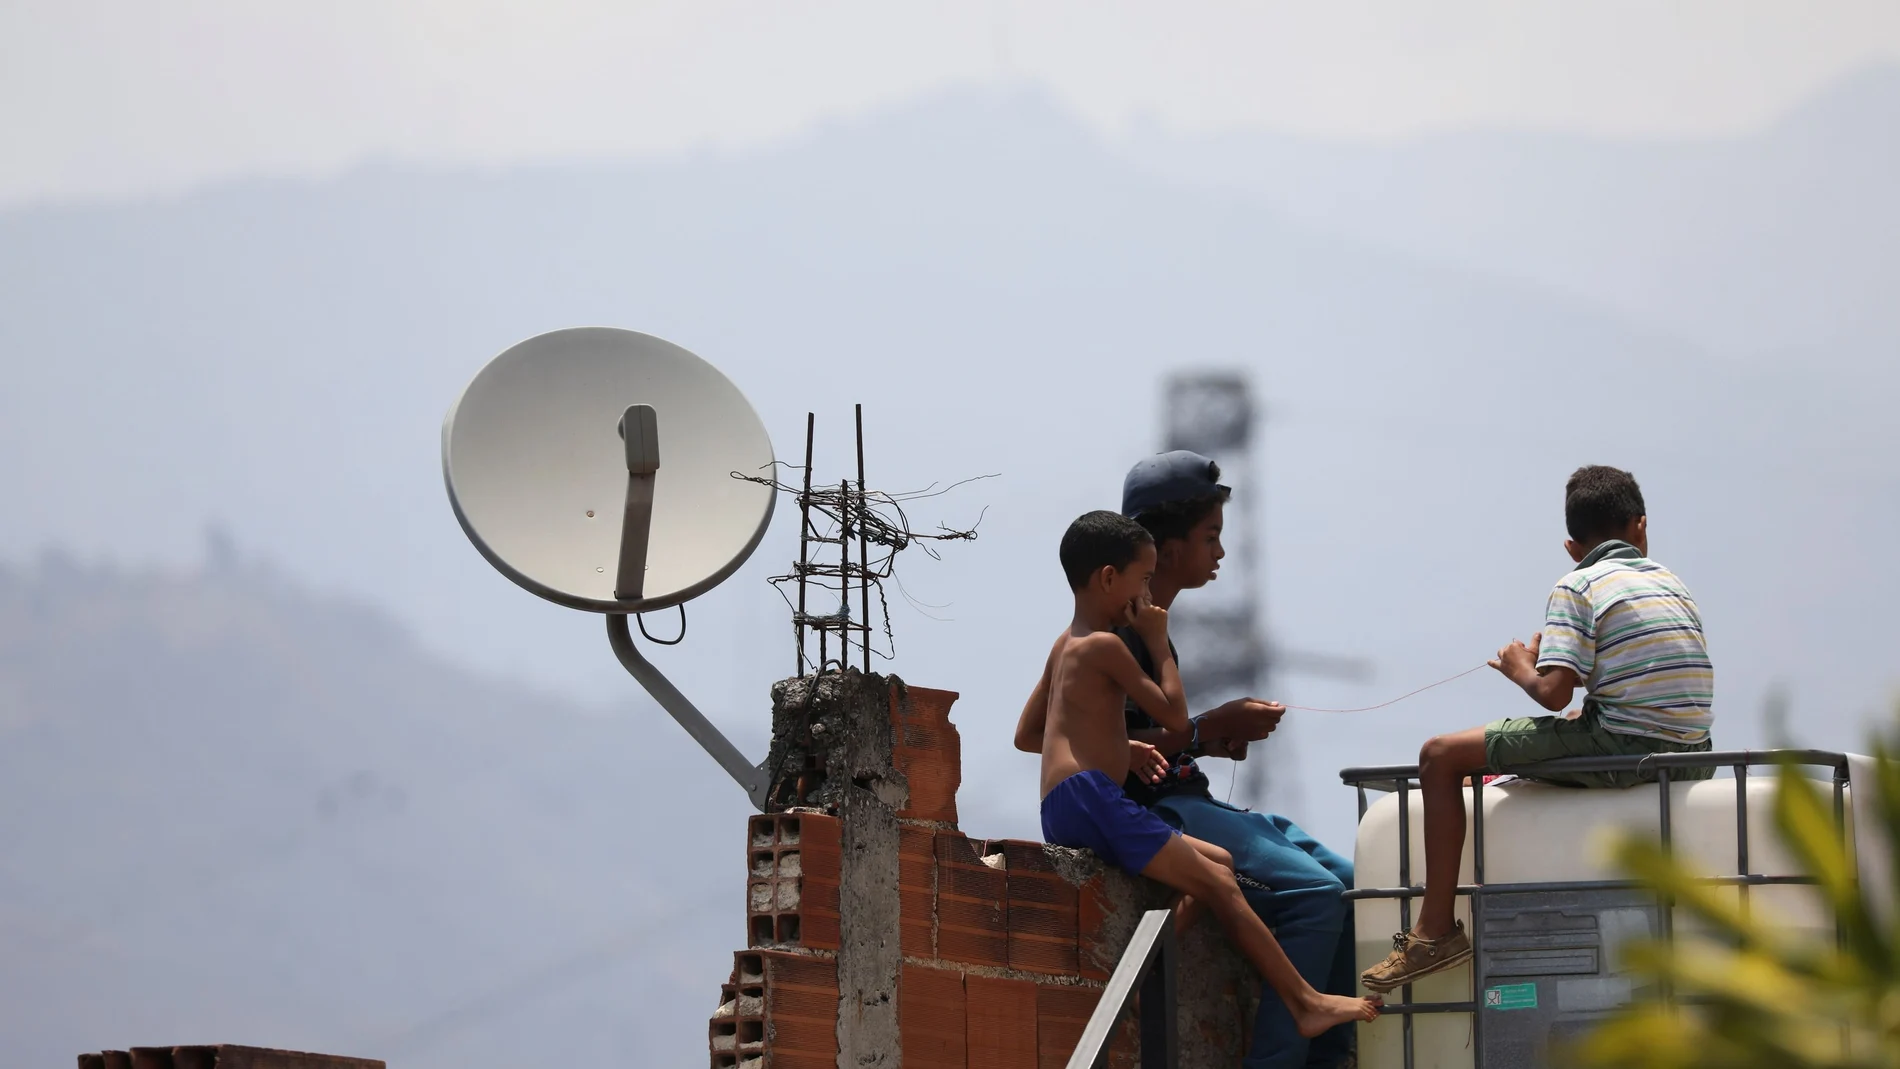 Children play near a satellite tv antenna in the low-income neighbourhood Catia after AT&T Inc said on Tuesday it has closed its DirecTV Latin America operations in Venezuela, in Caracas